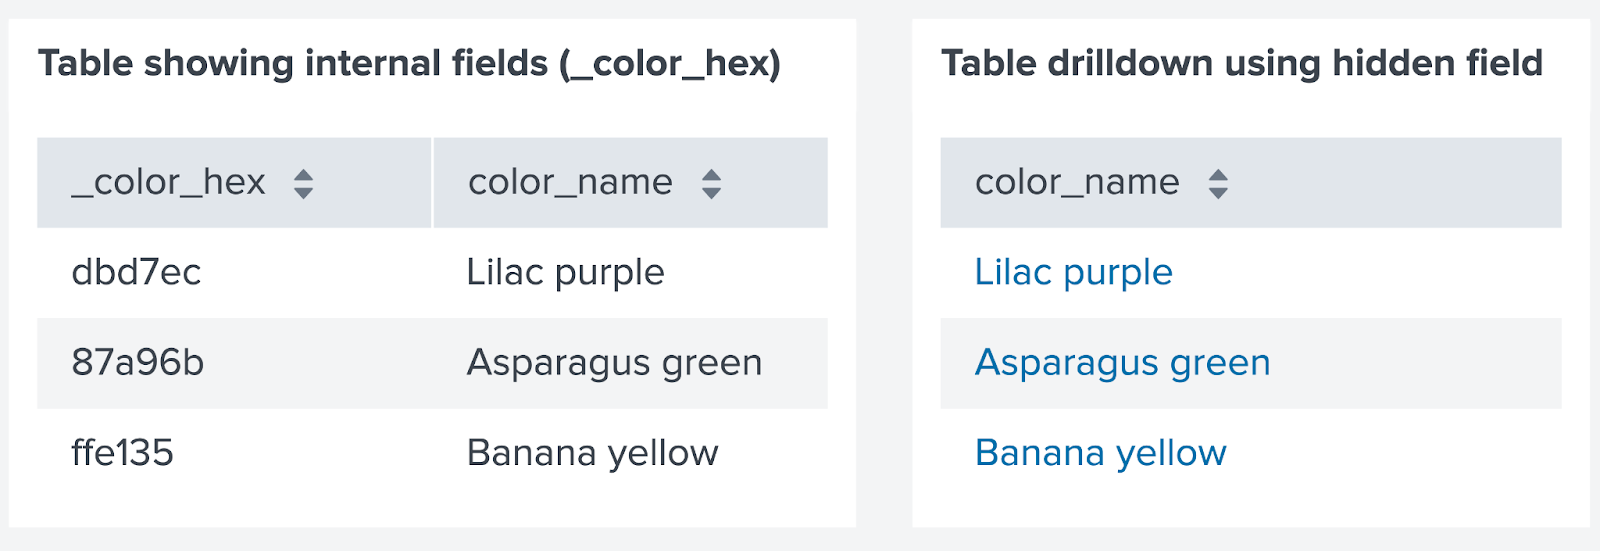 Two tables side by side. The table on the left has a column called _color_hex and the table on the right does not have a column called _color_hex. Both tables have a column called color_name. The difference is that the table on the right's color_name column's values are hyperlinked.